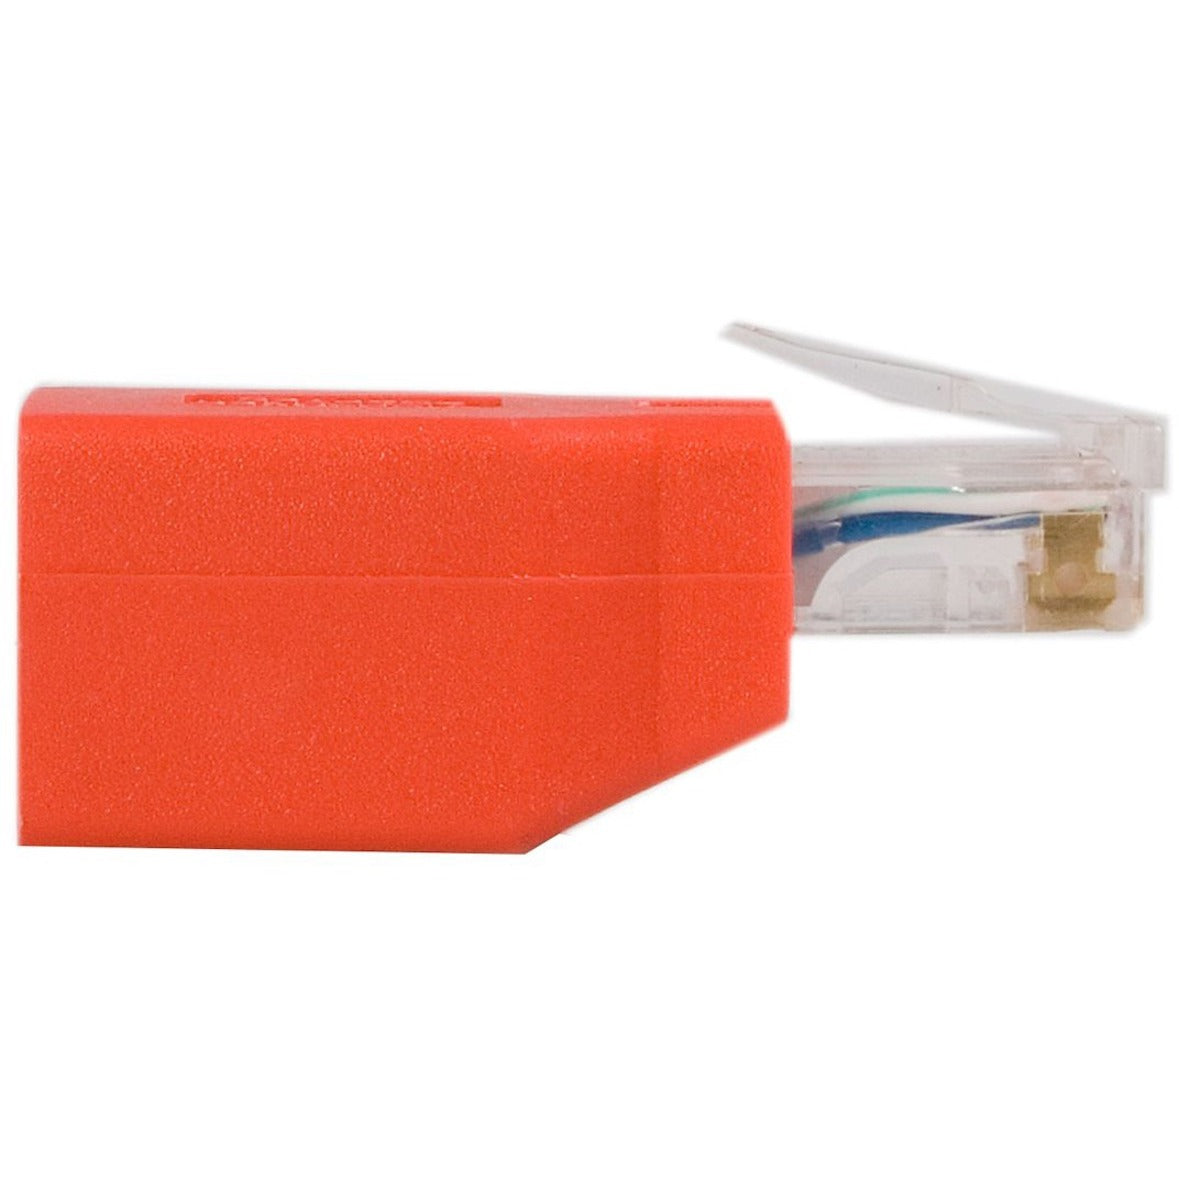 StarTech.com C6CROSSOVER Cat.6 to Crossover Adapter, RJ-45 Network Male to Female, Red